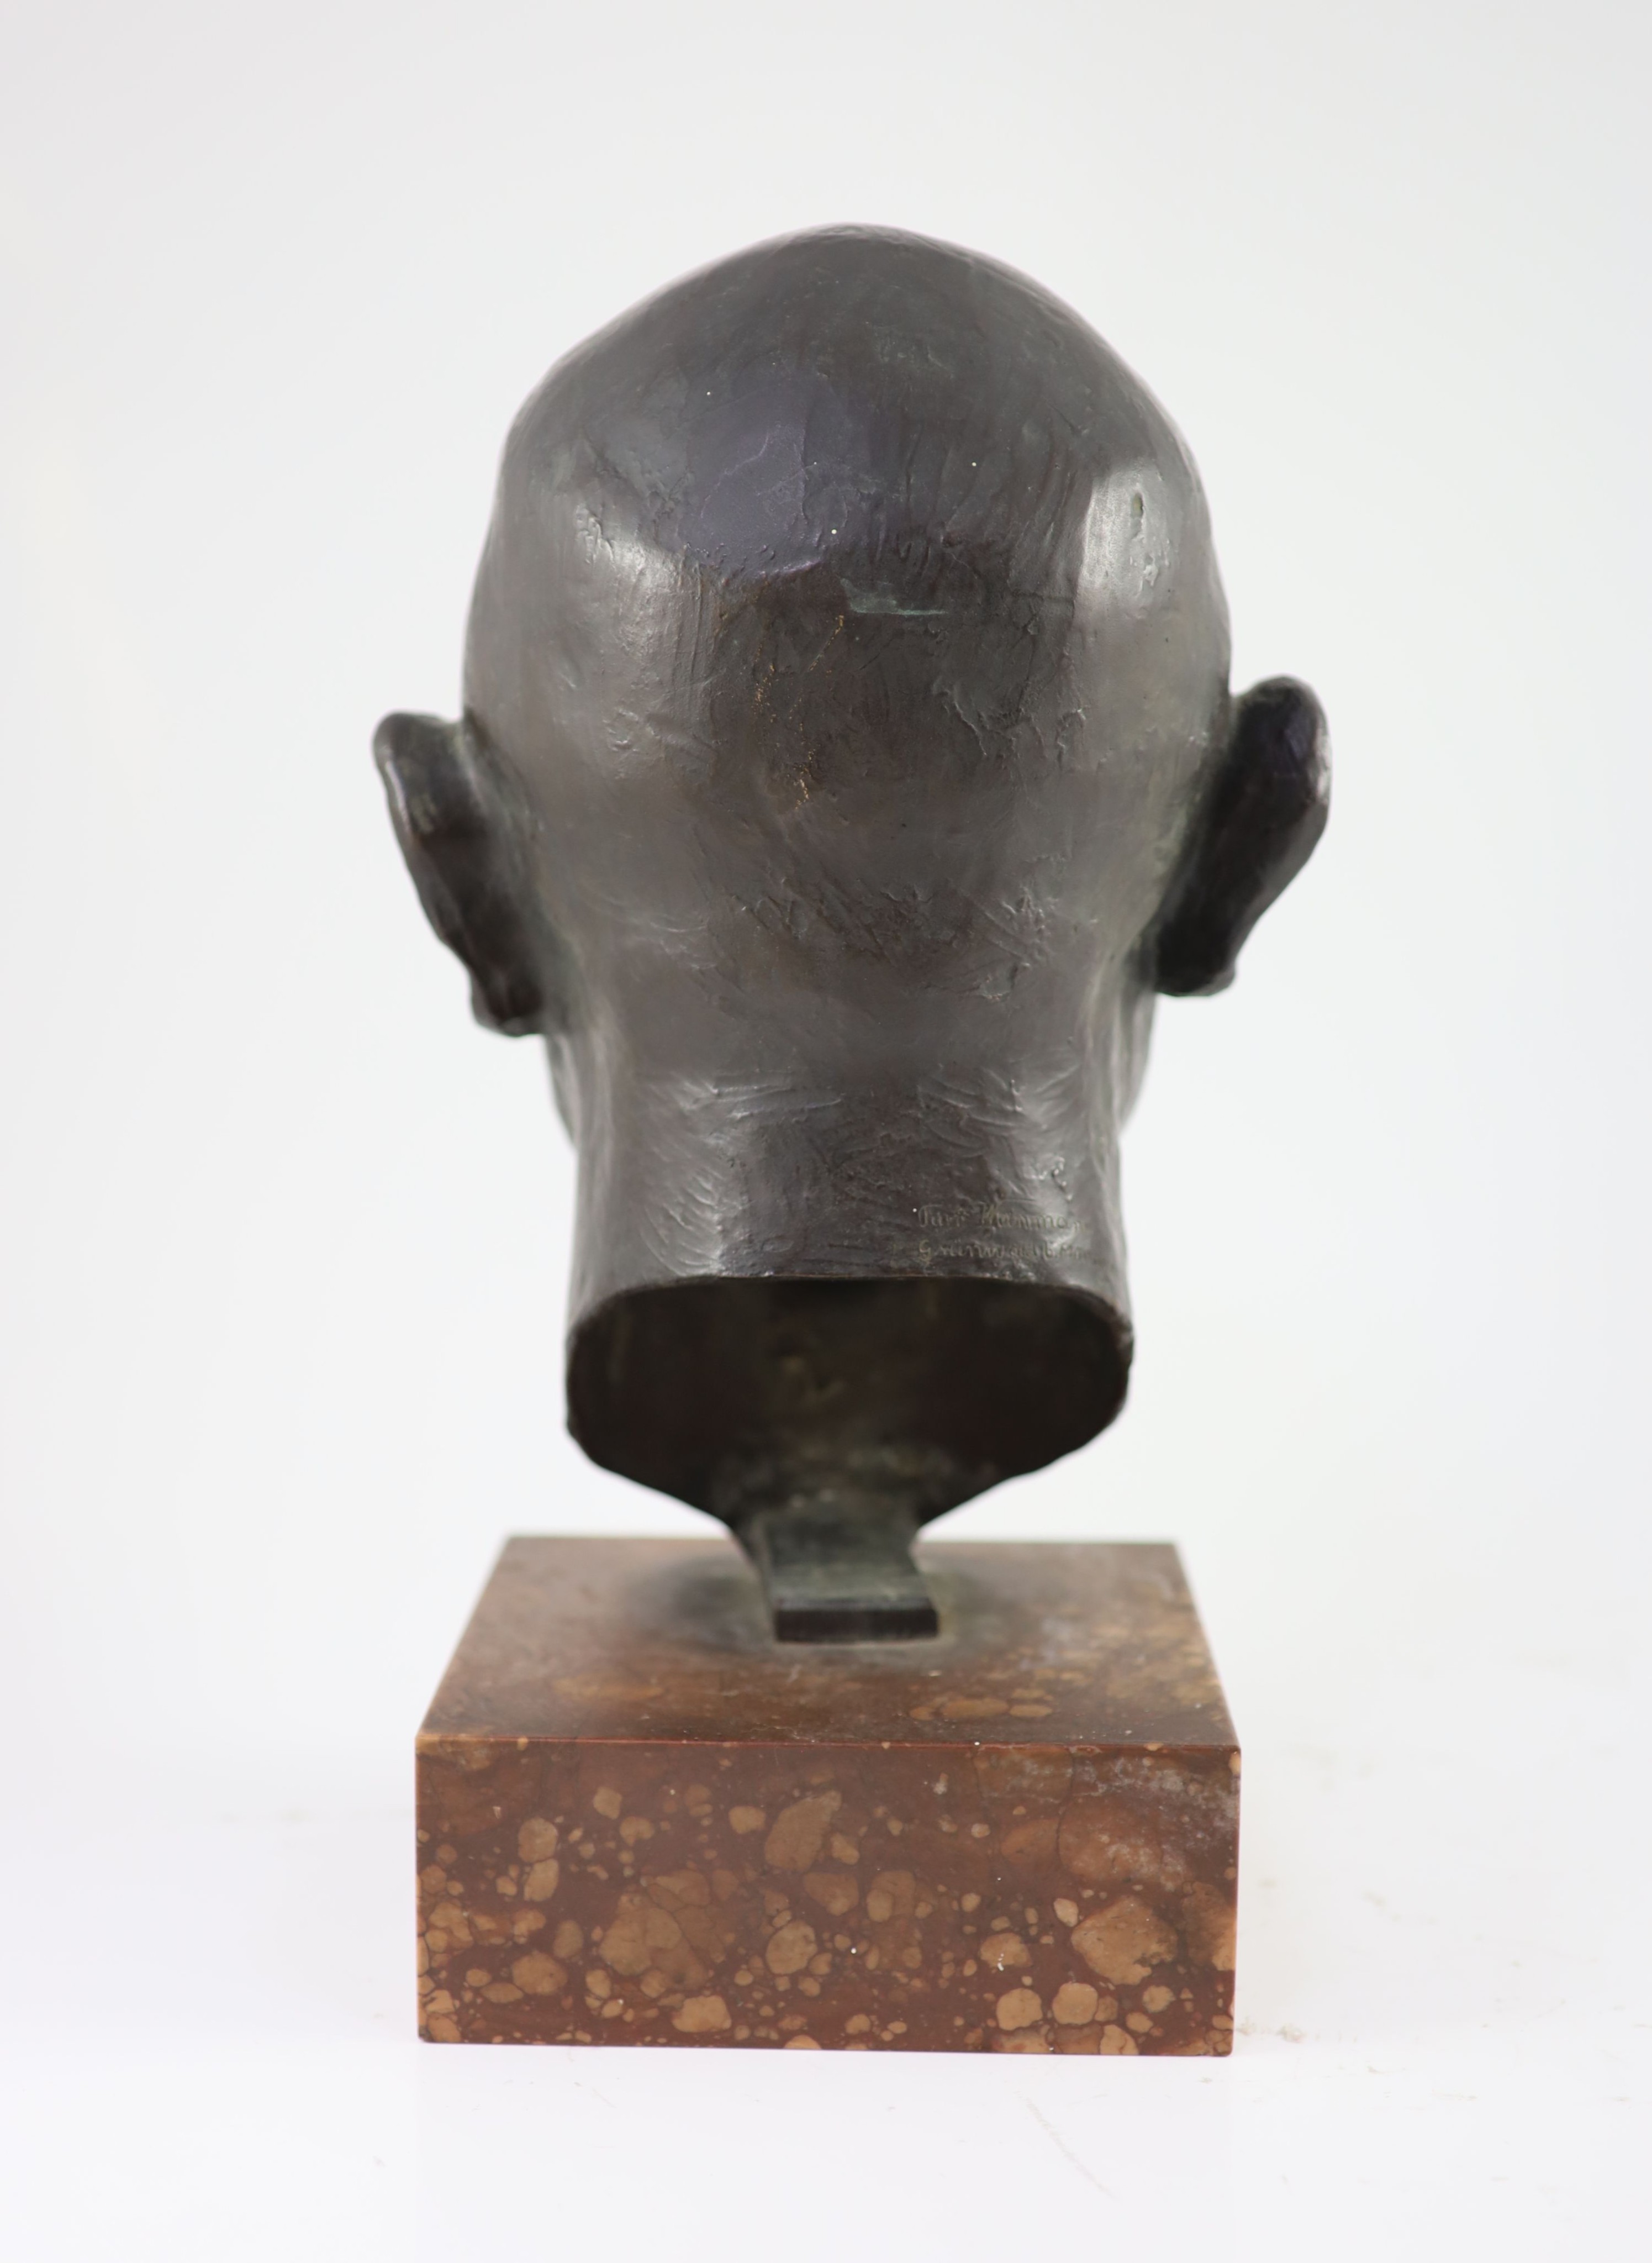 Turi Weinmann, (German, 1883-1950). A lifesize bronze head study, possibly a self-portrait of the artist, H 39cm overall.